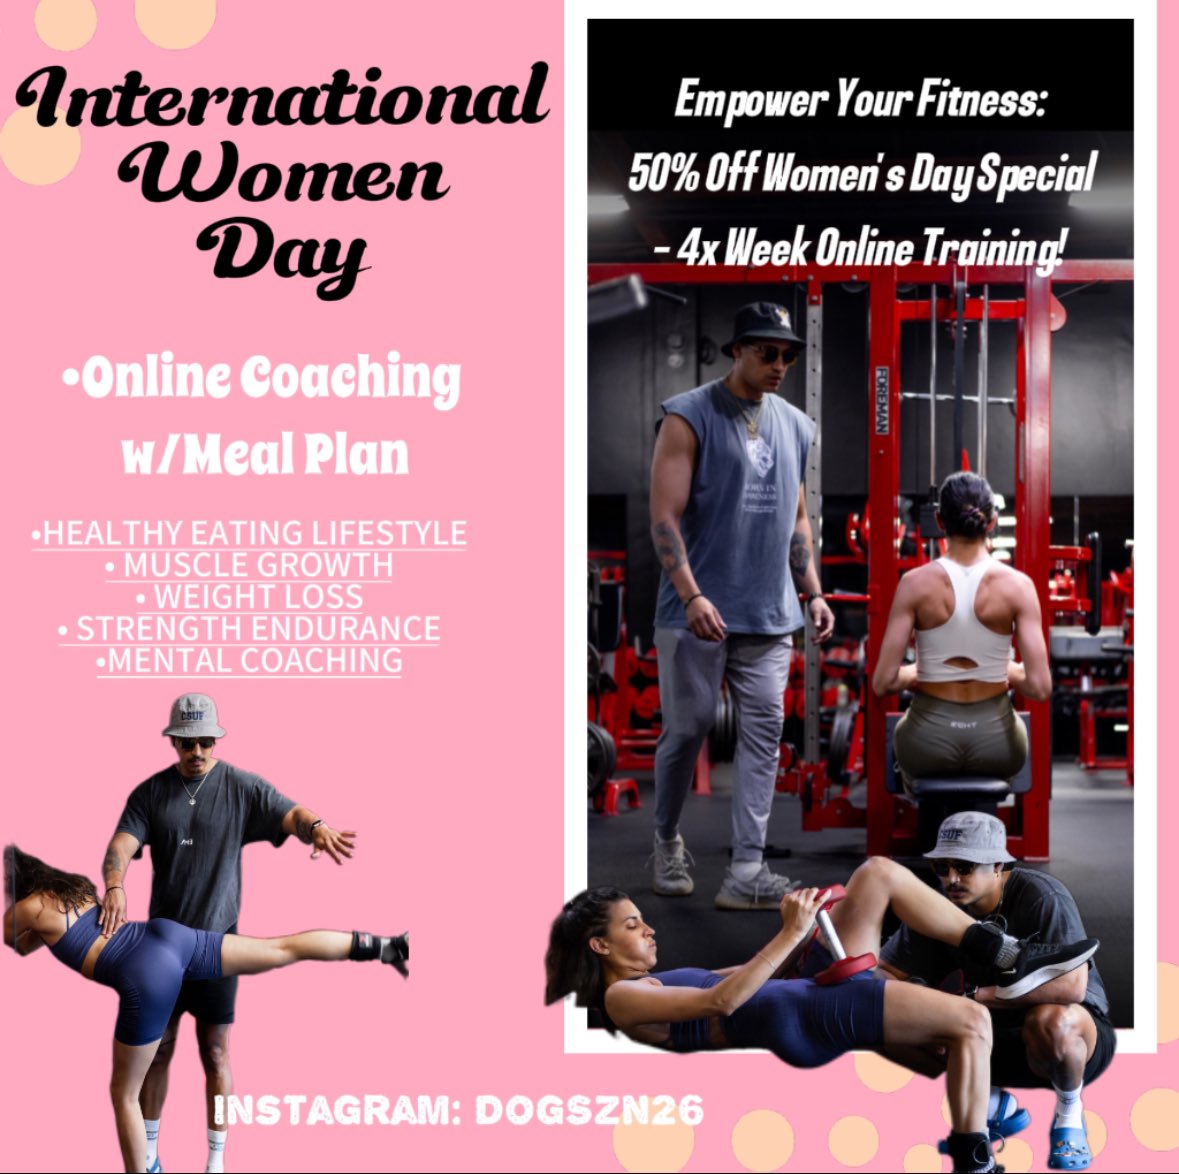 Hit Dm if you need help getting your fitness goals inline. #nationalwomensday #WomenEmpowerment #WomensDay